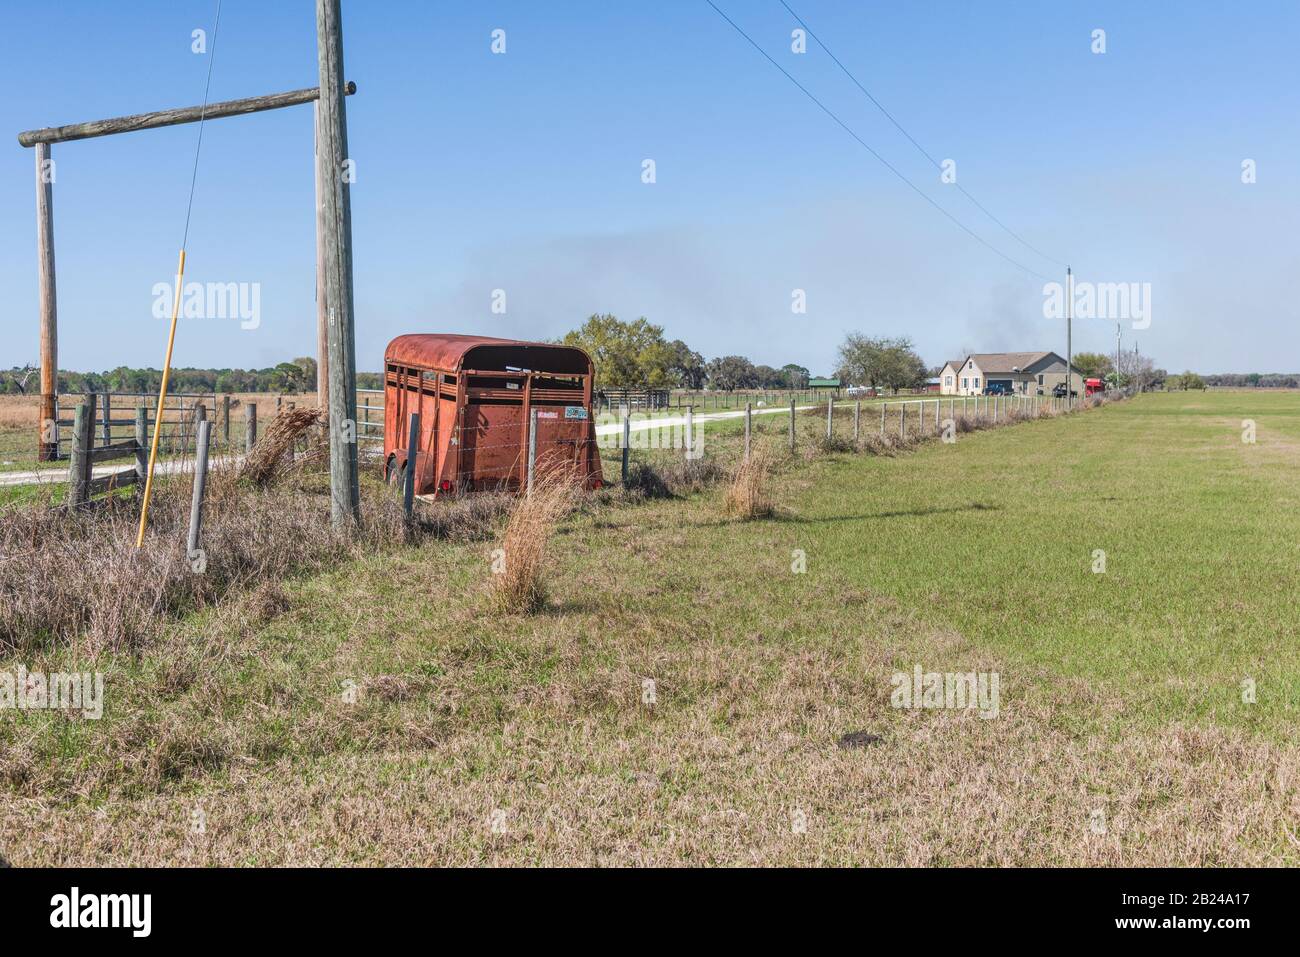 Typical Florida Roadside Farmland displaying an old rusted trailer. Stock Photo